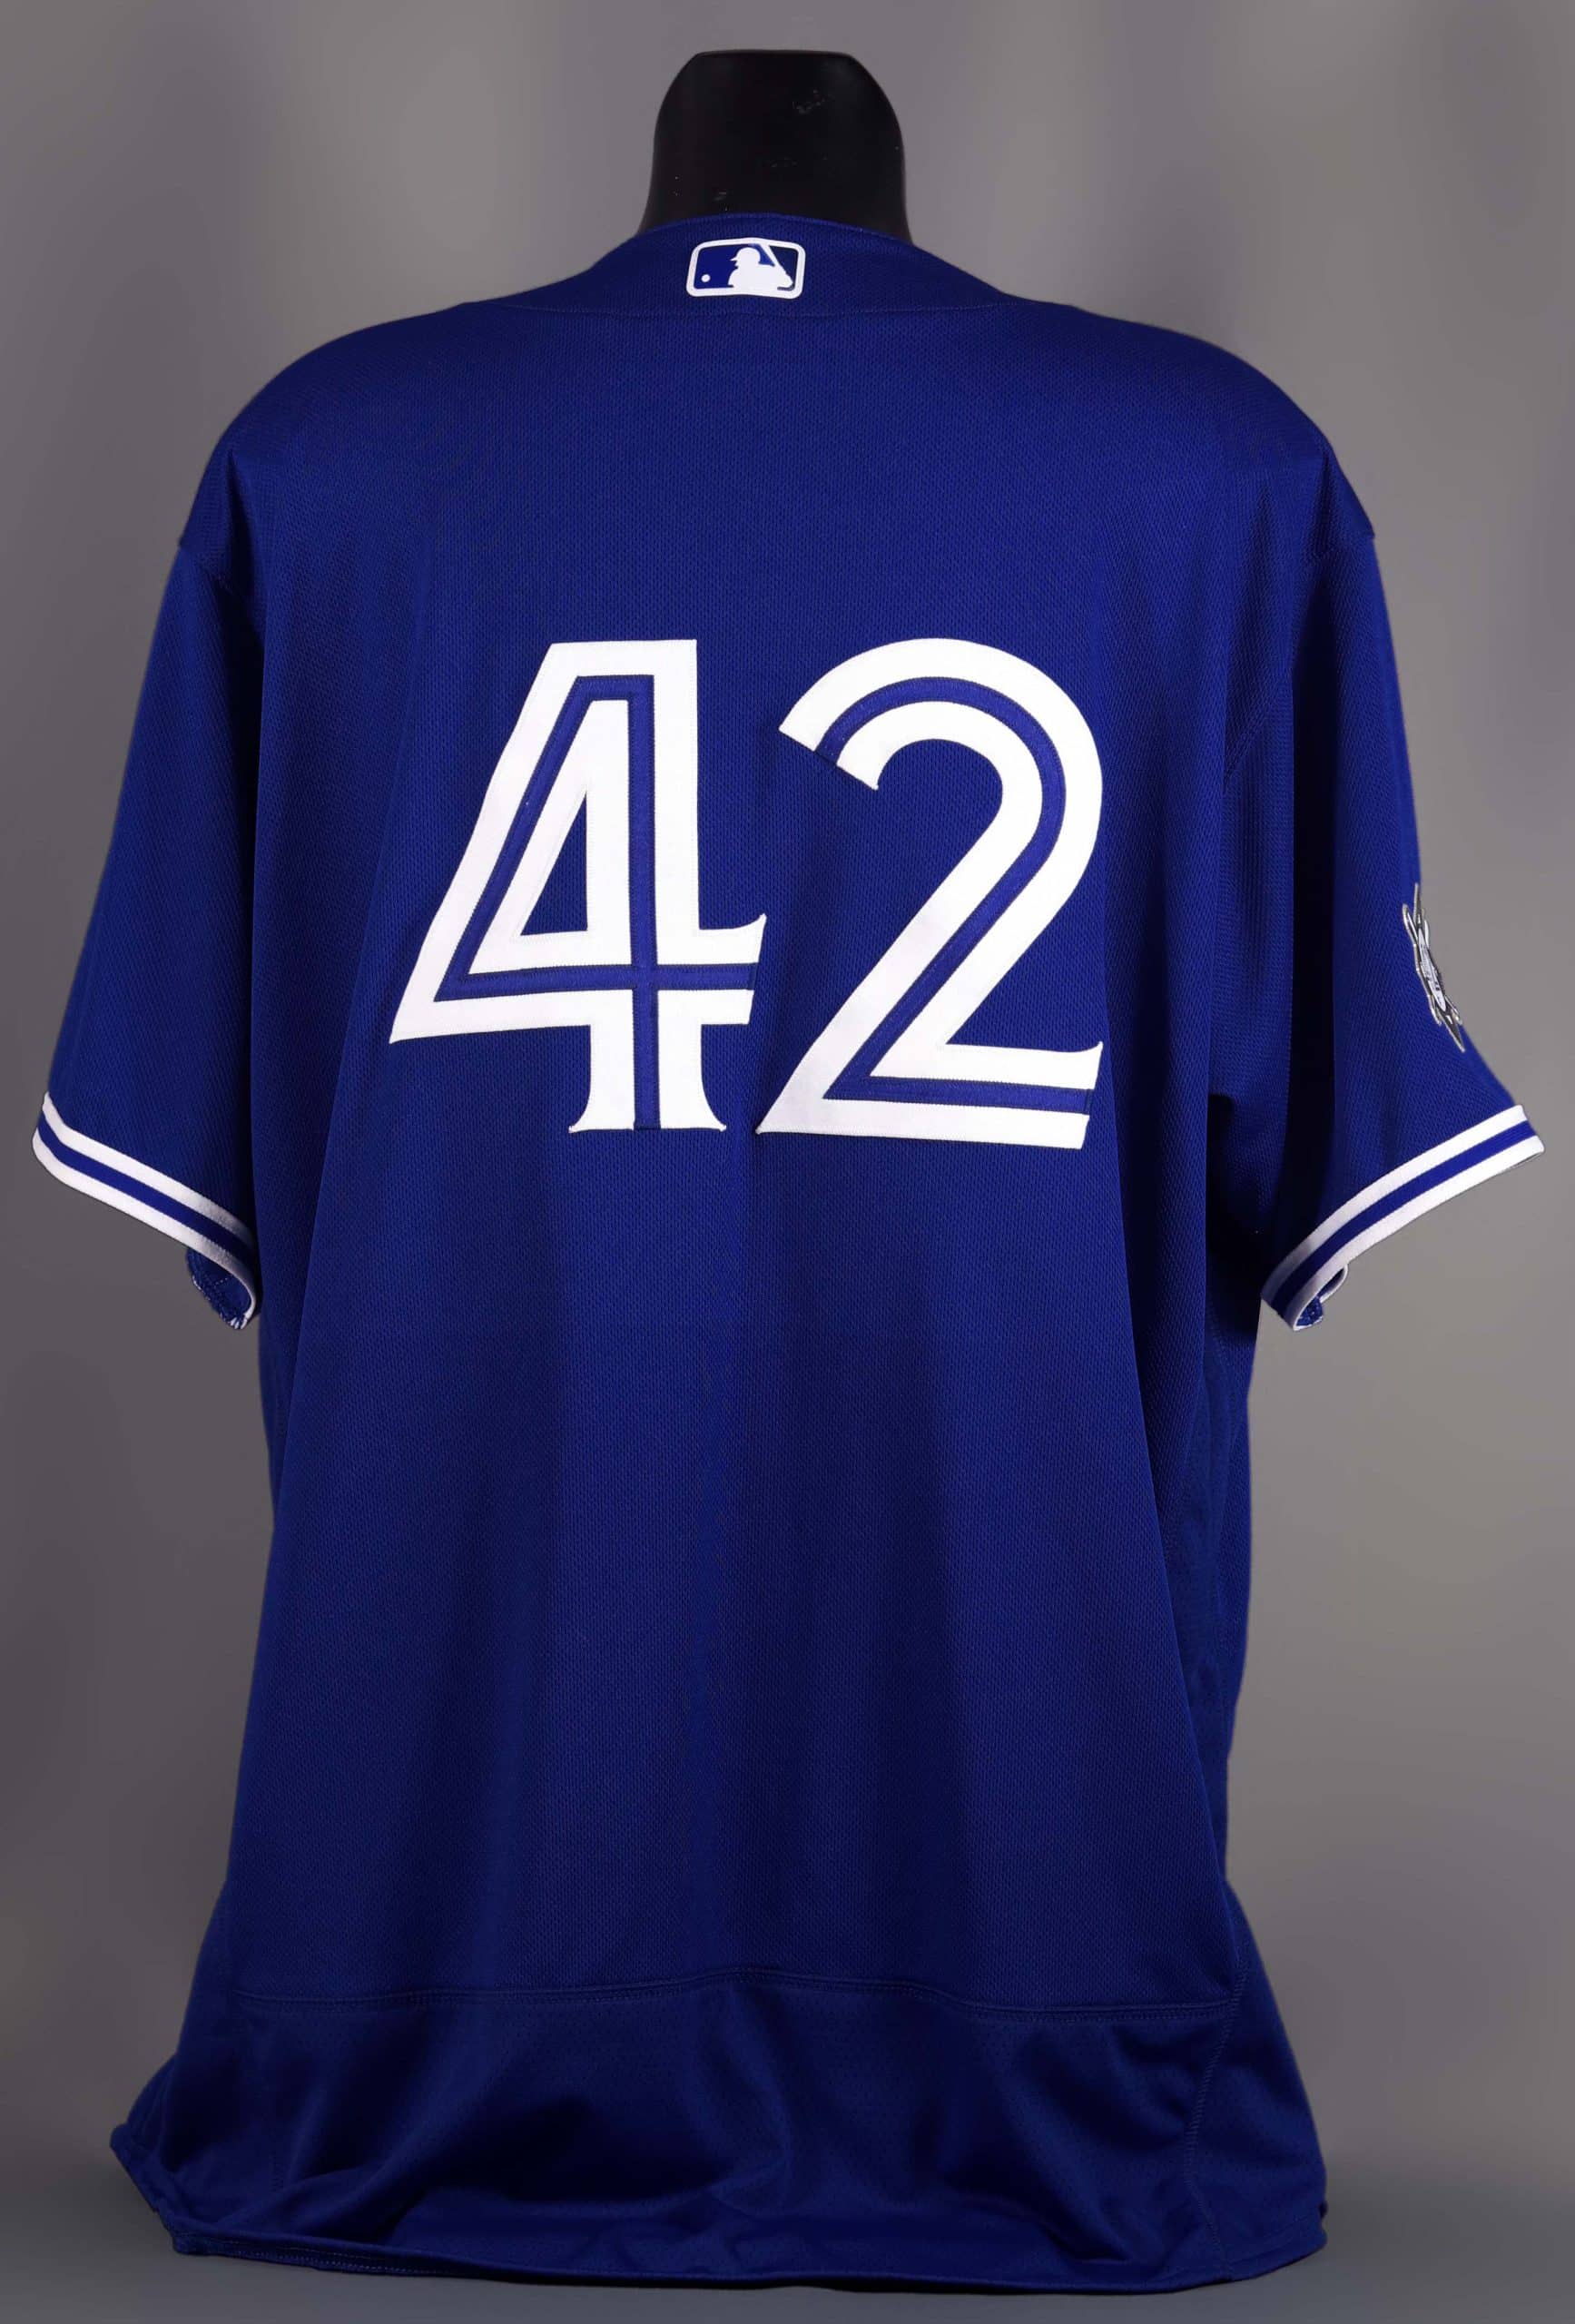 Canadian Baseball Hall of Fame and Museum to celebrate Jackie Robinson ...